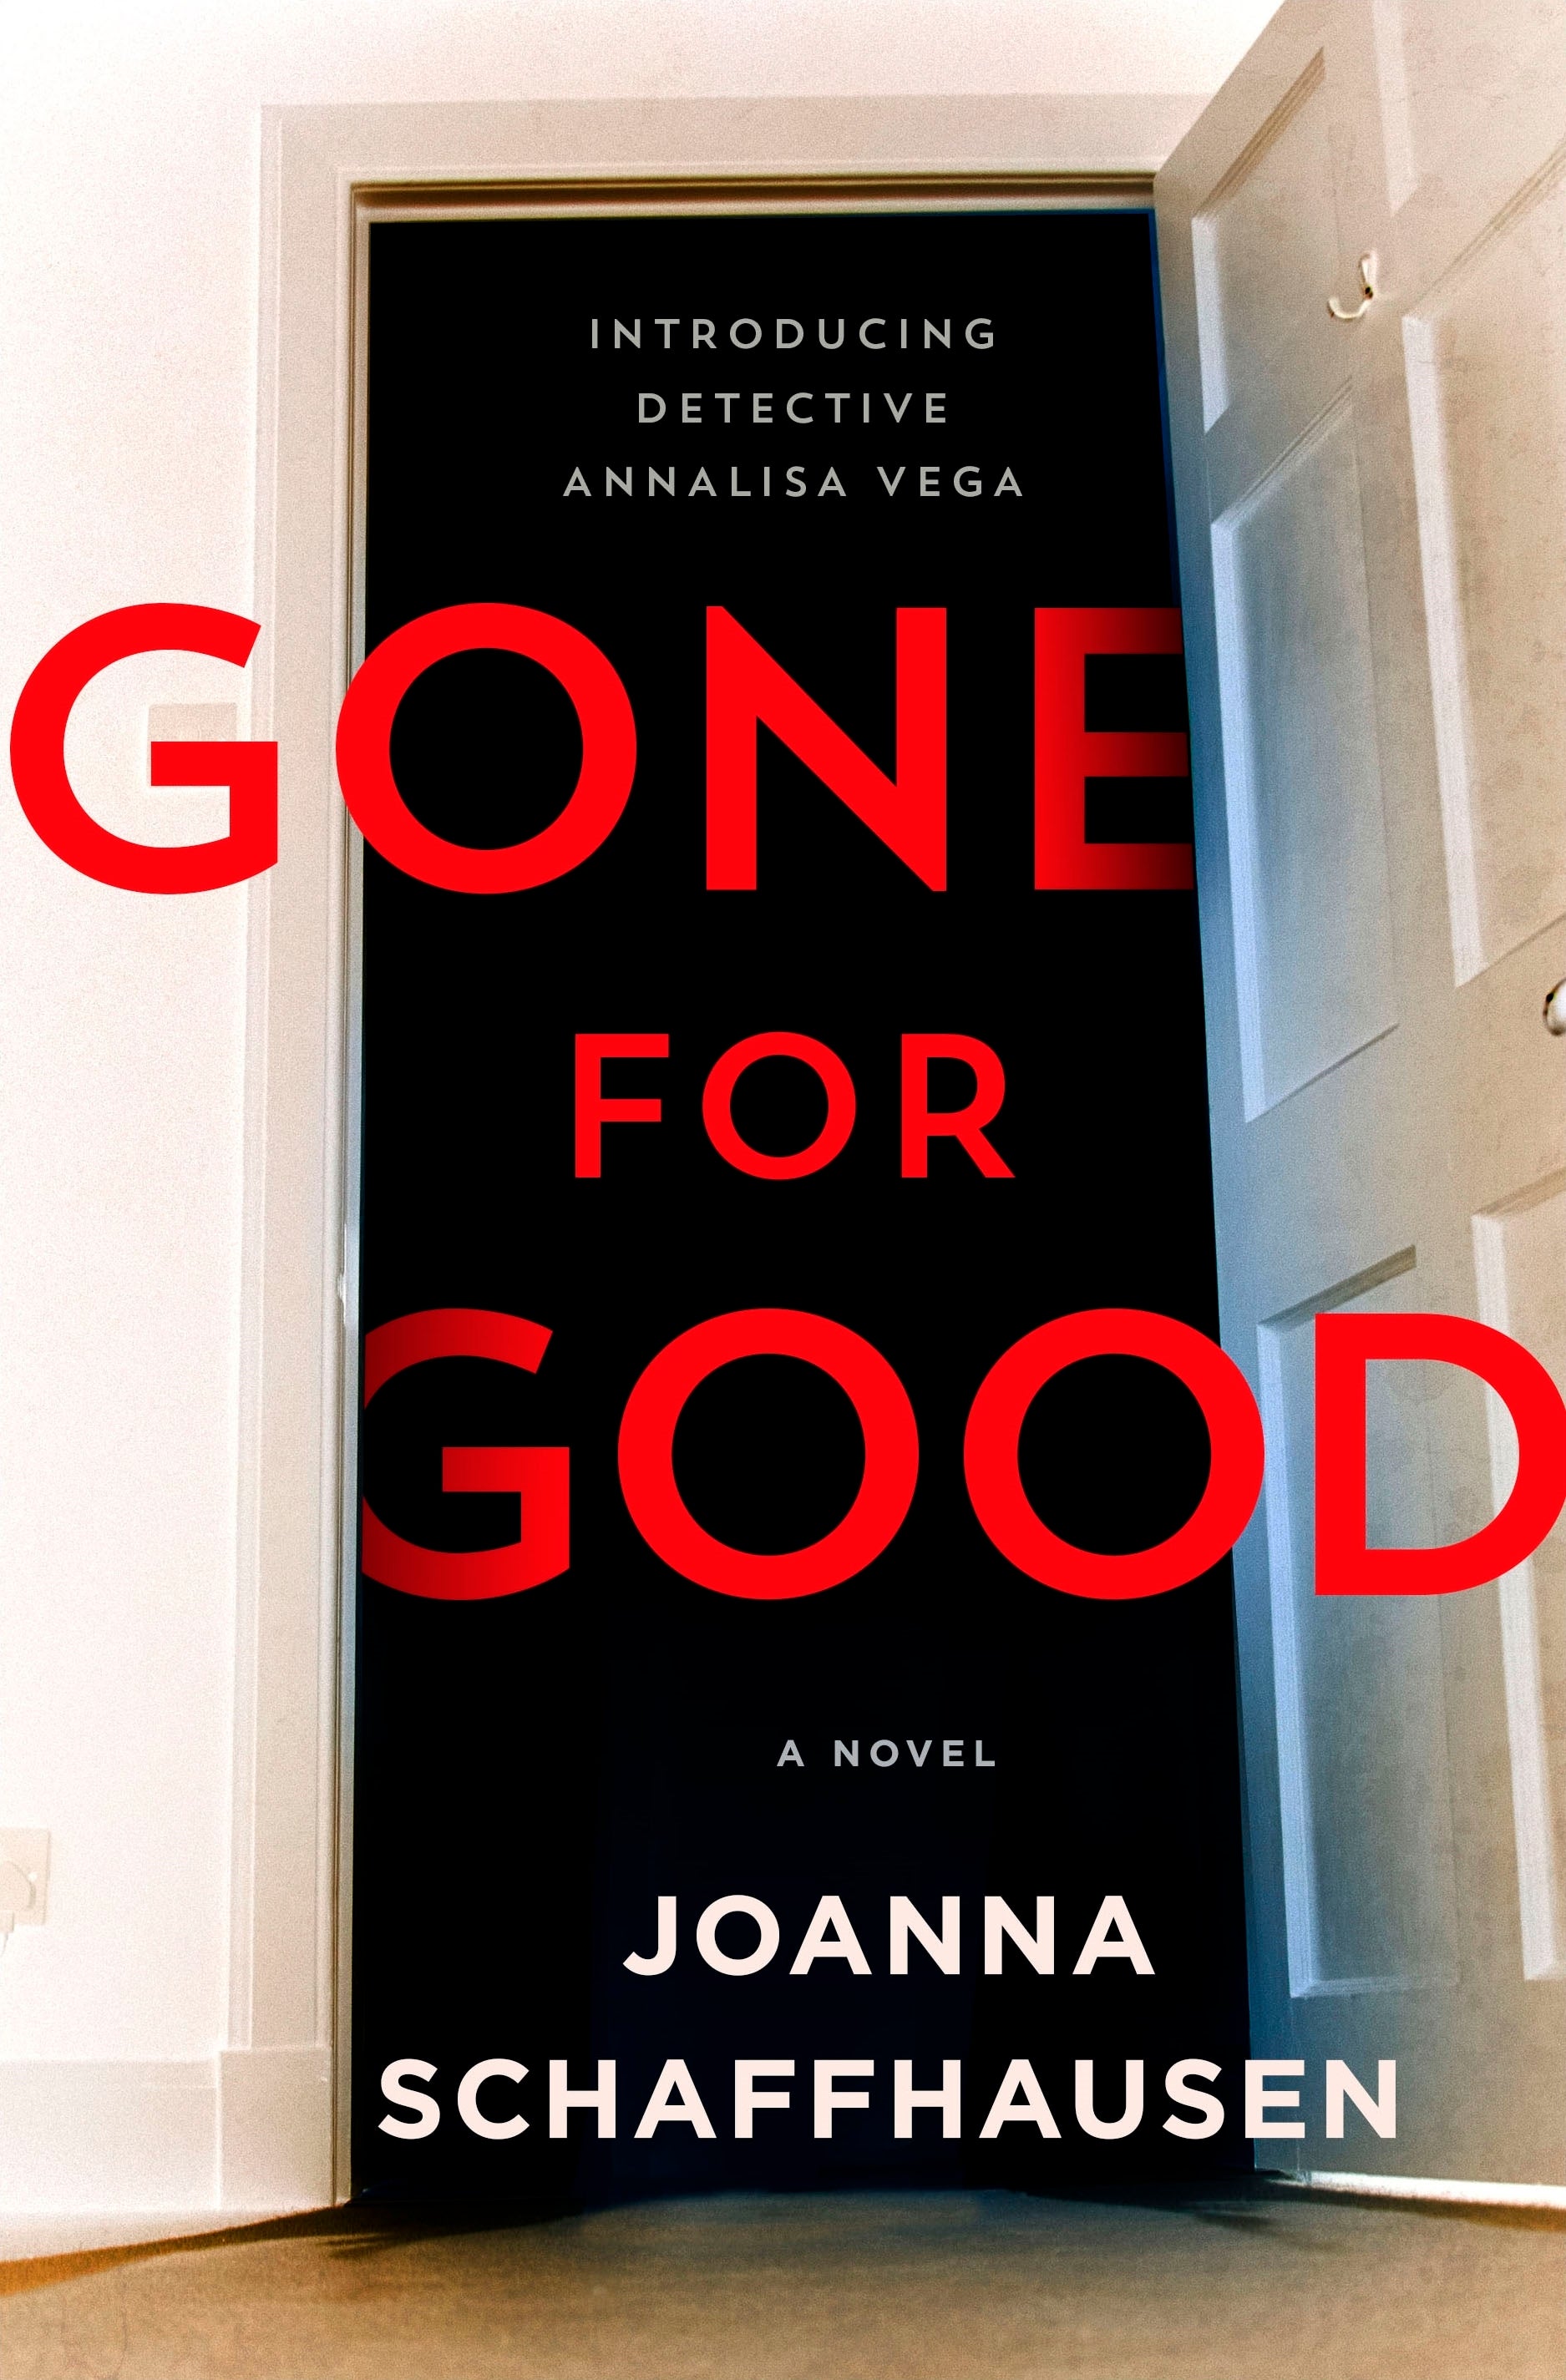 Book Review - Gone for Good